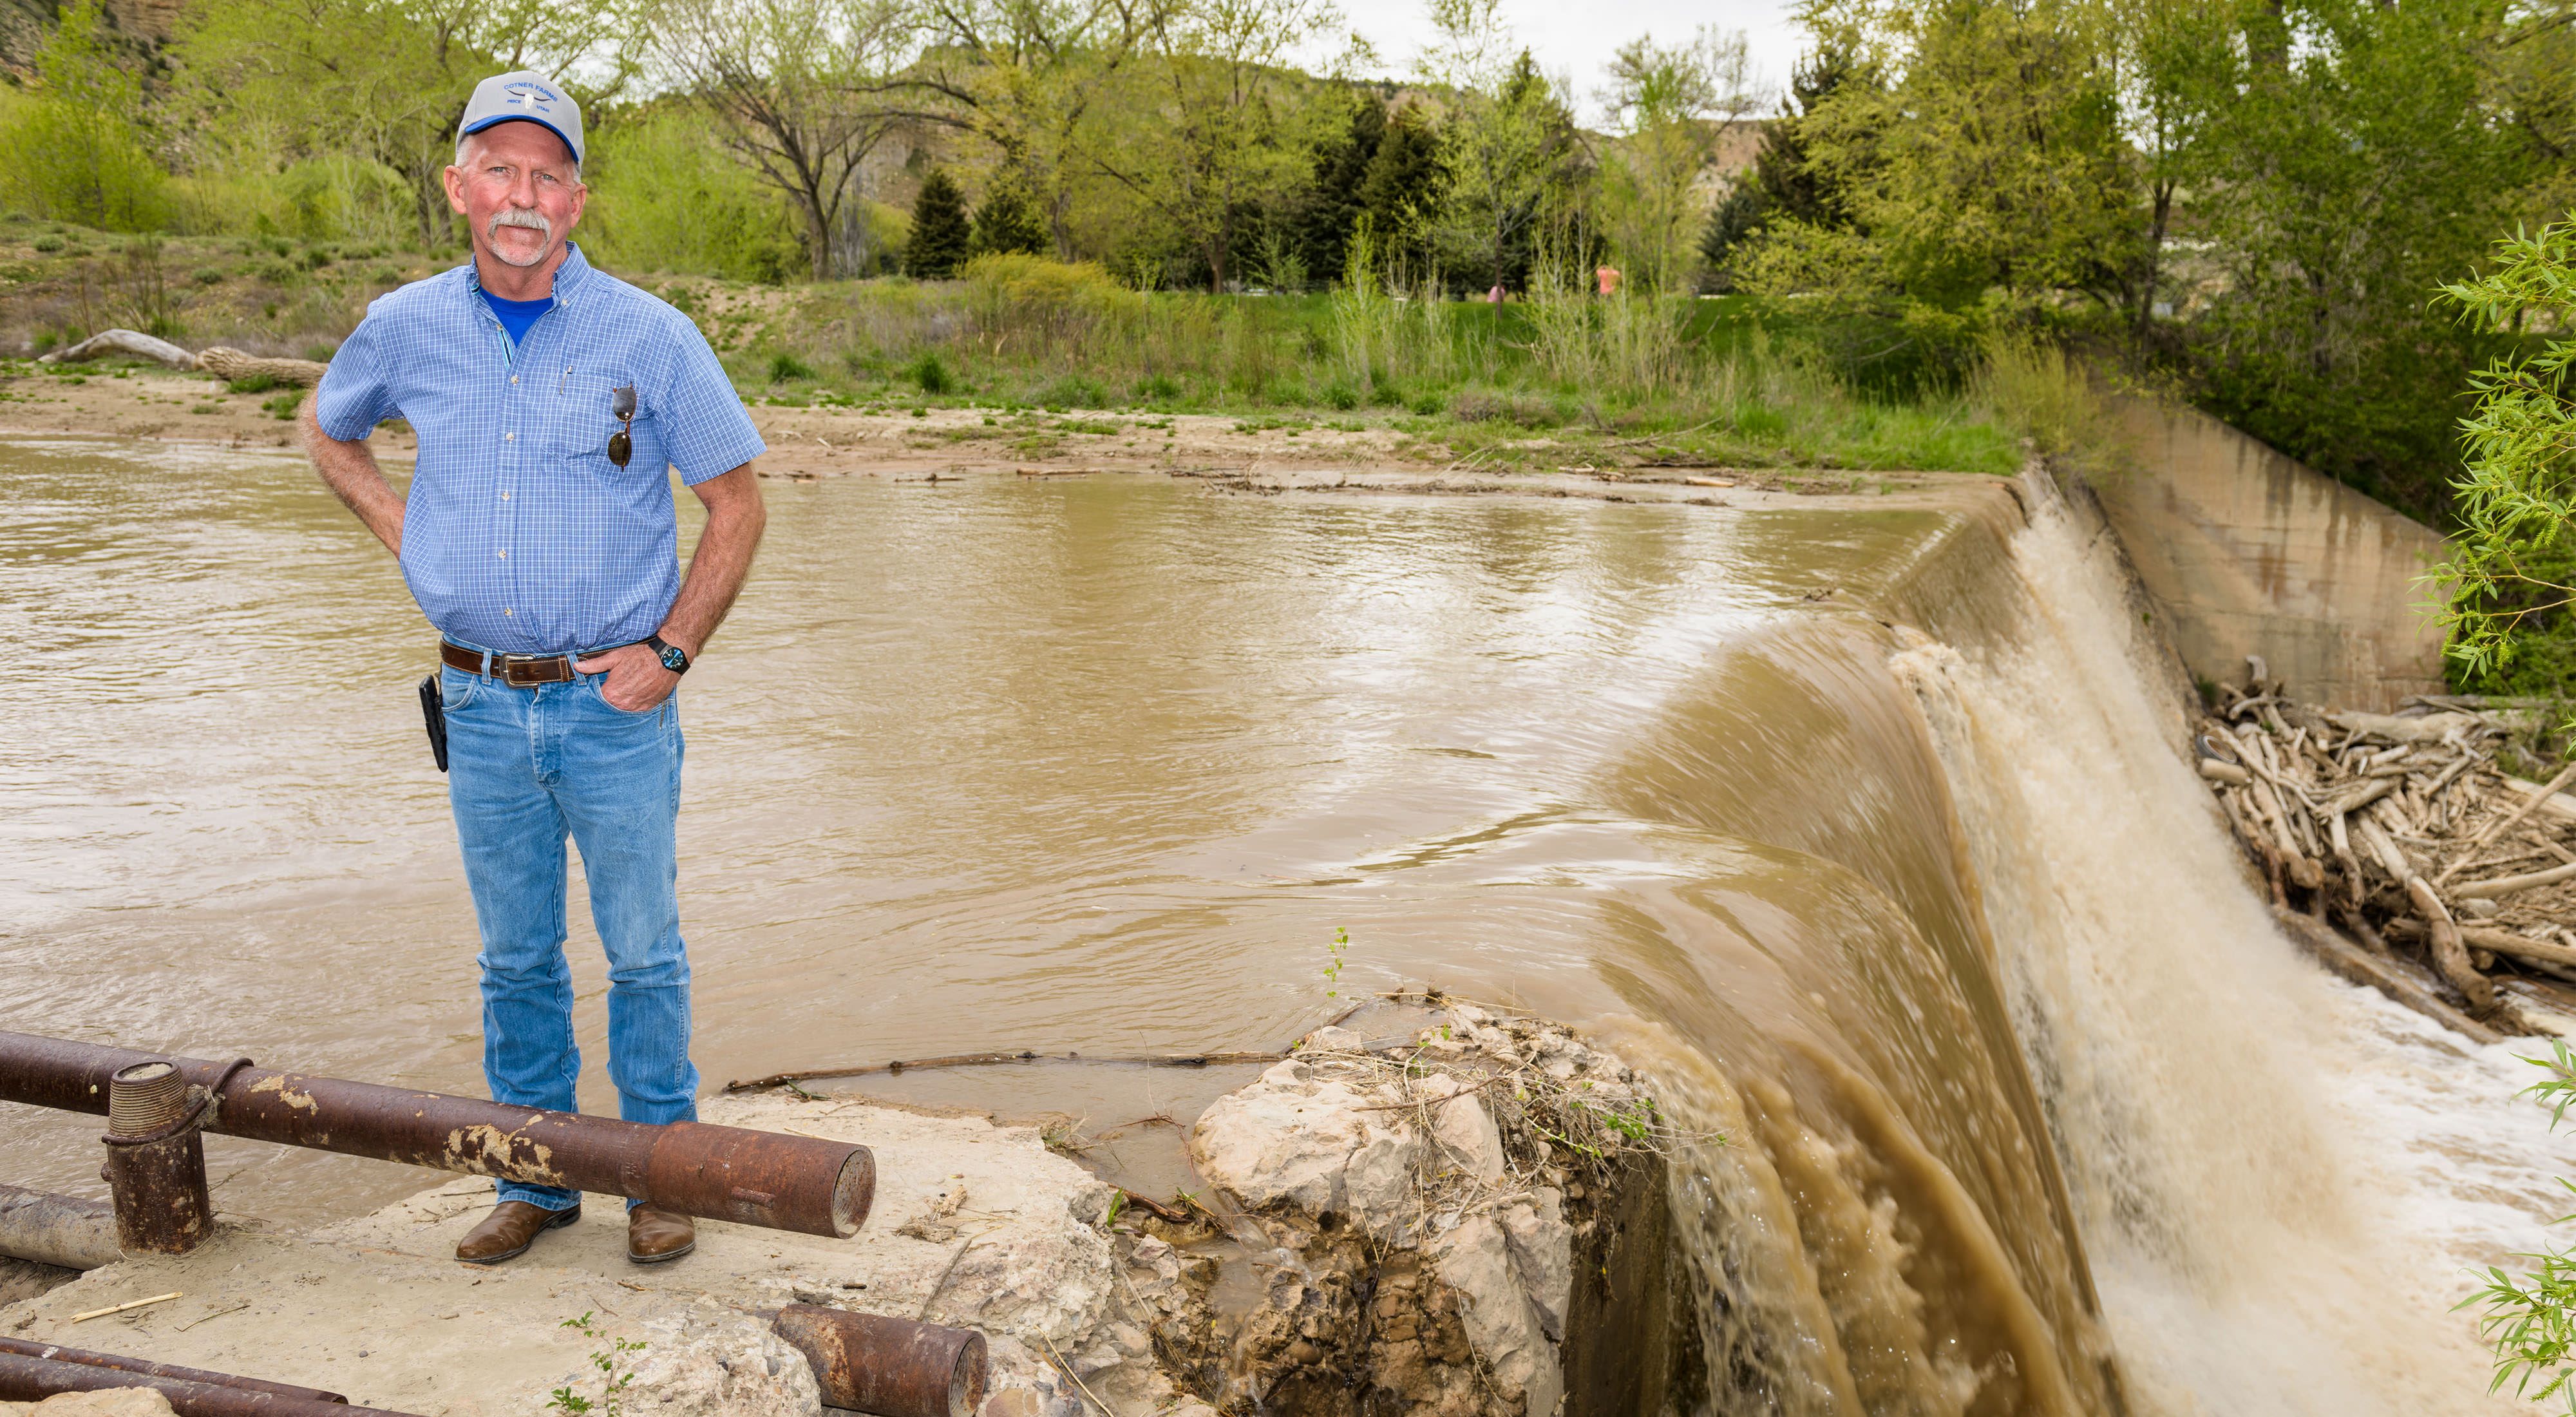  A farmer stands in front of a muddy canal as it spills over a small waterfall. 